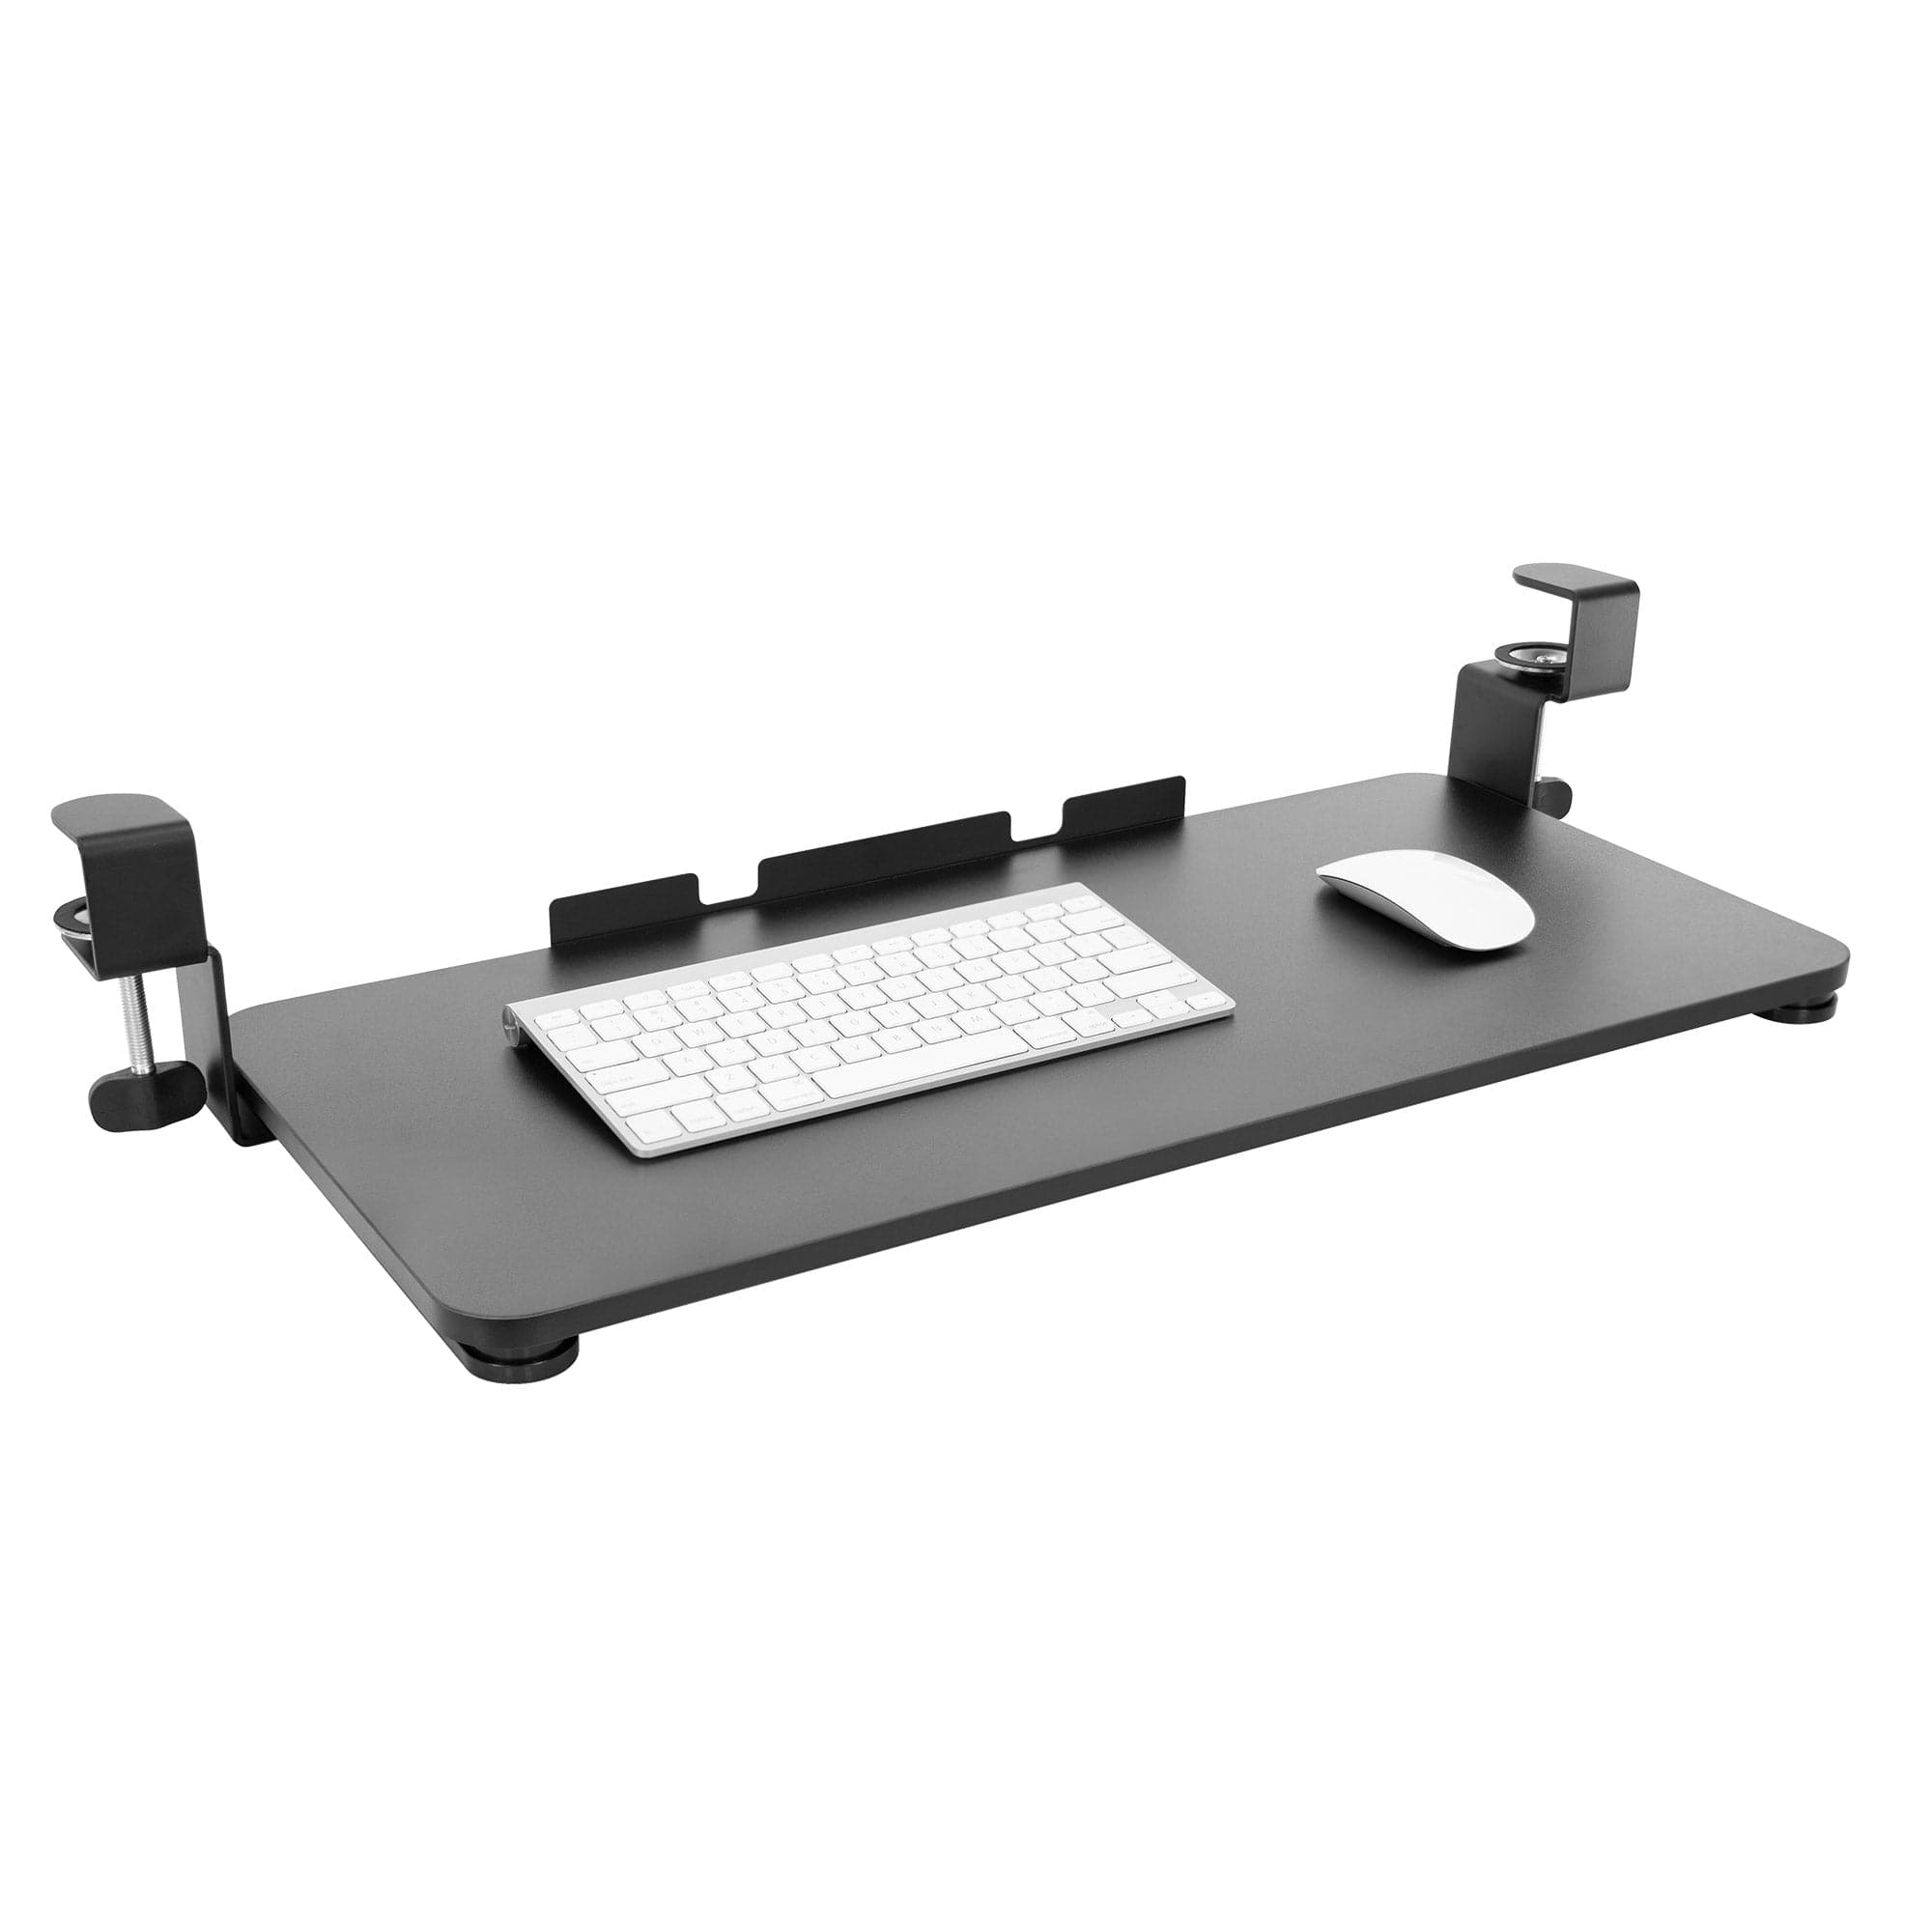 https://cdn.shopify.com/s/files/1/0051/3674/4566/products/clamp-on-adjustable-keyboard-and-mouse-tray-957780.jpg?v=1687298561